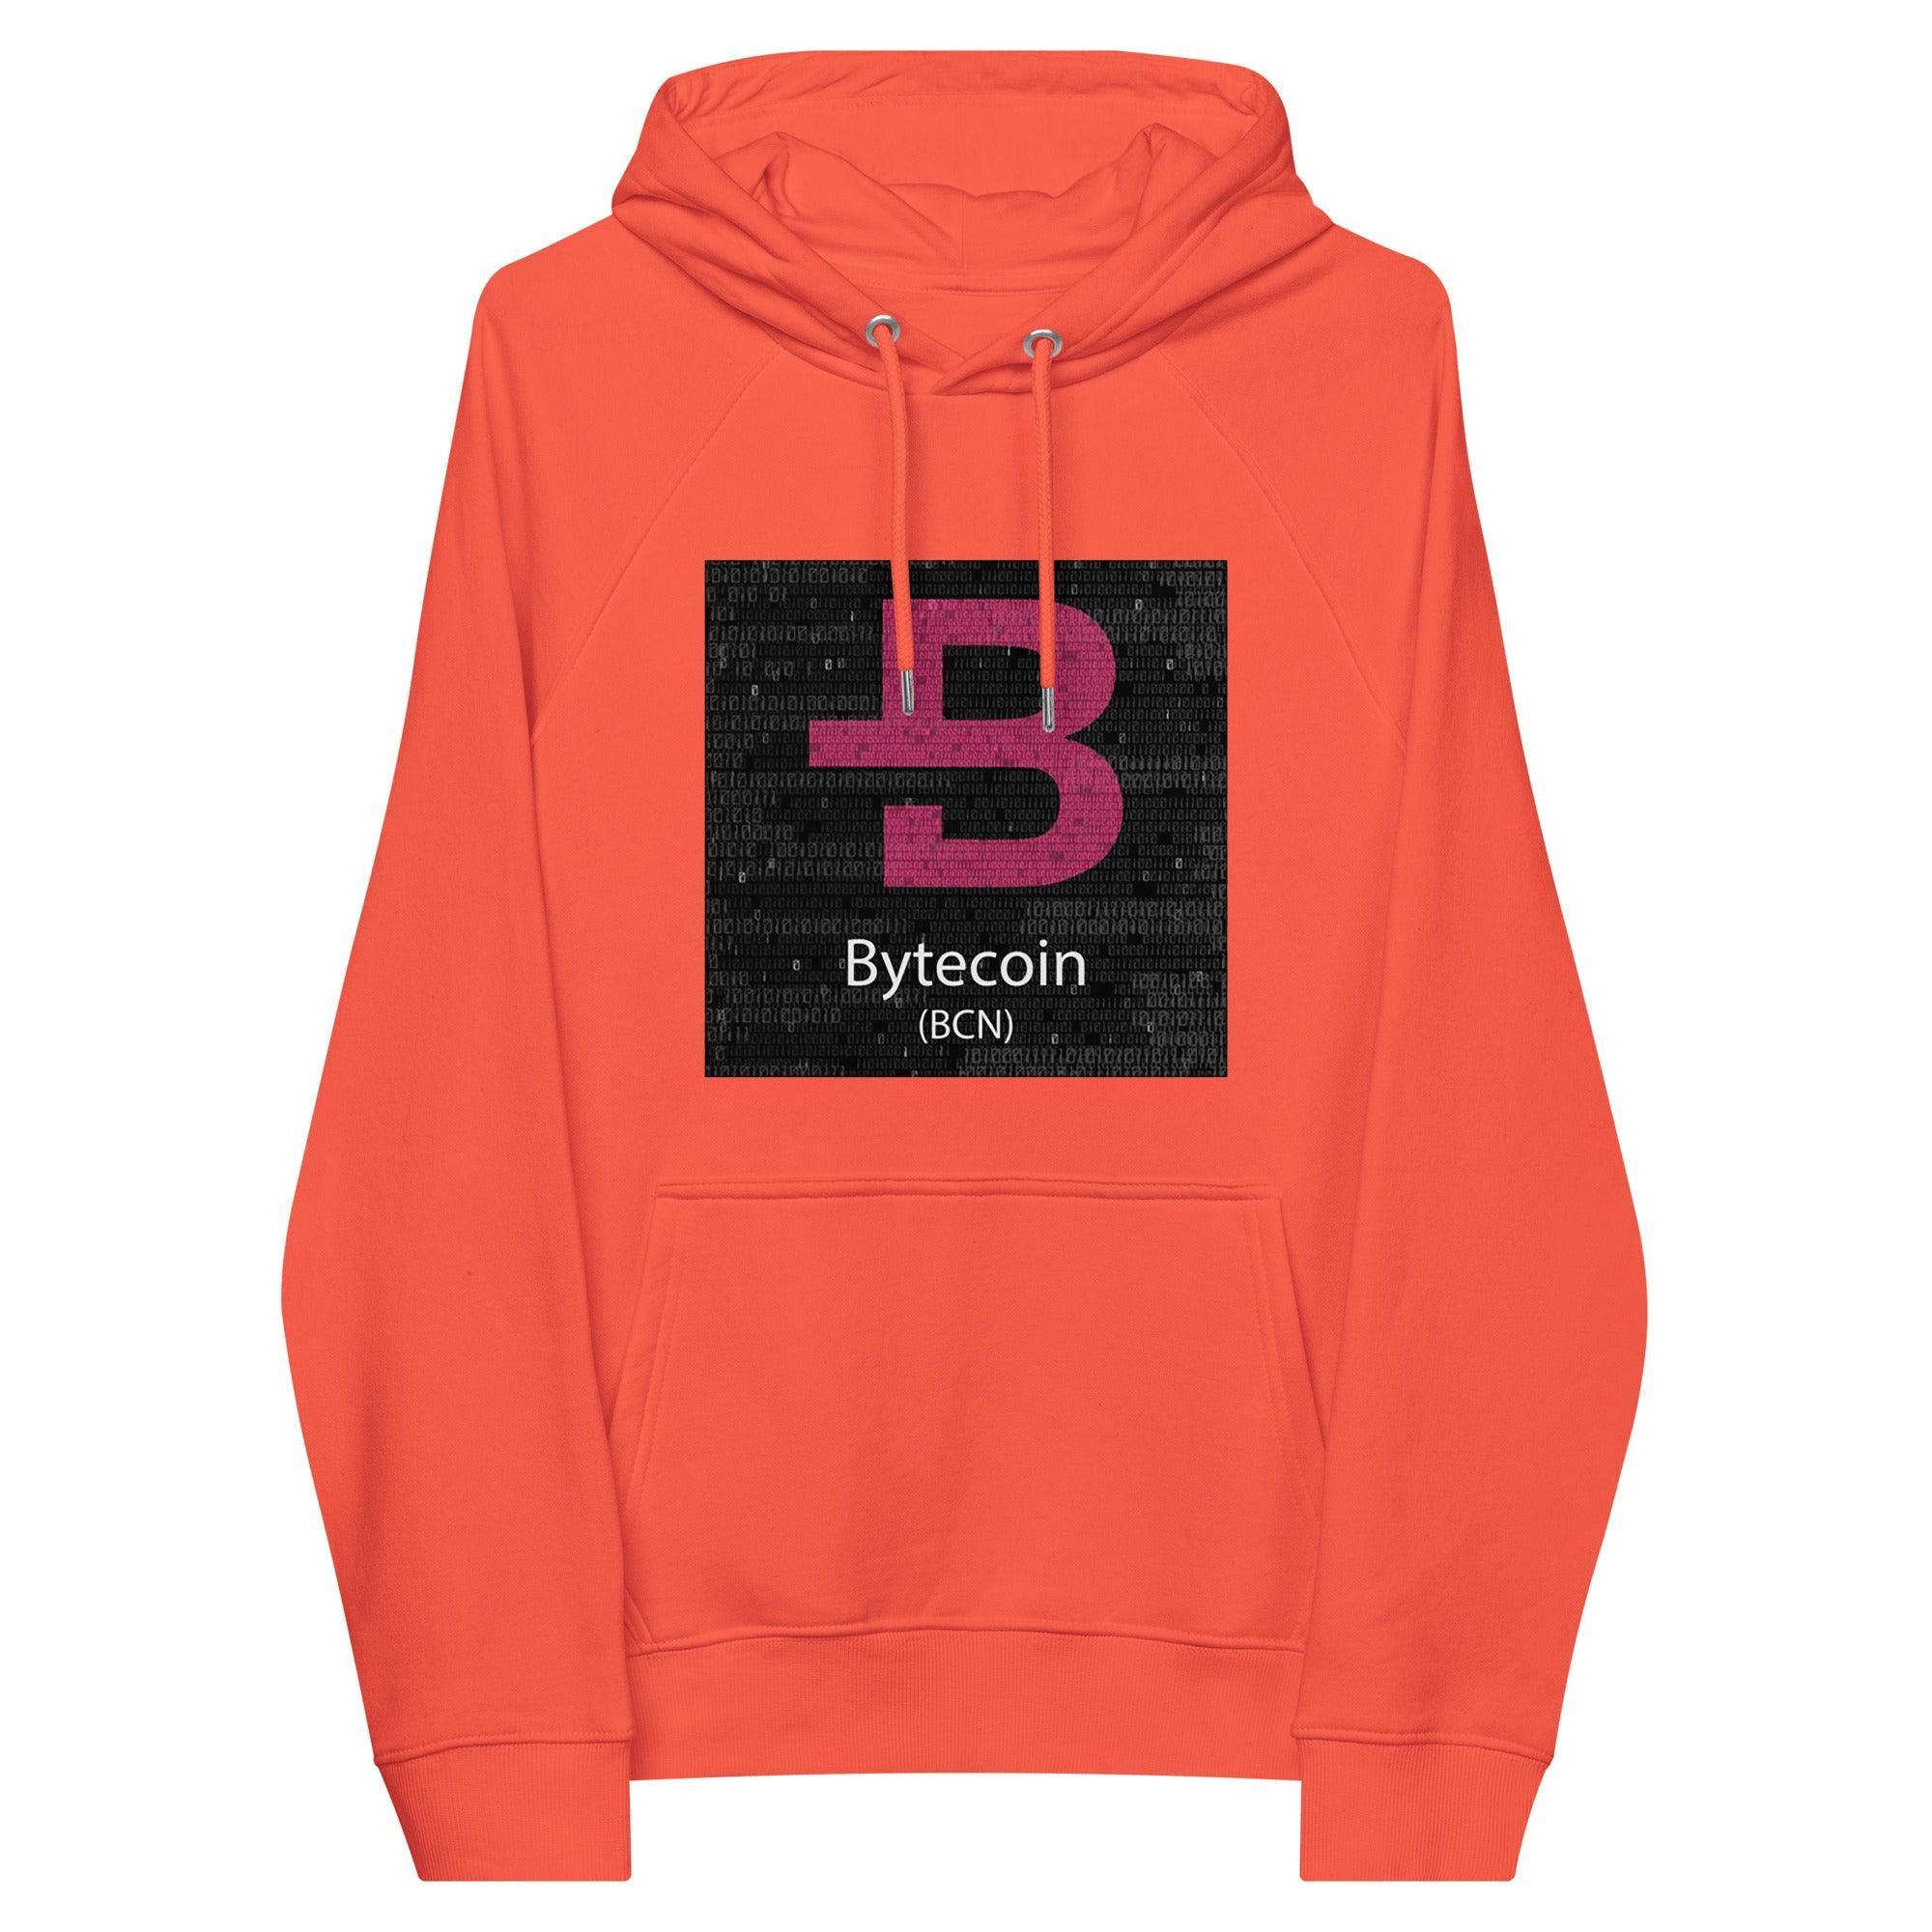 Bytecoin | BCN Pullover Hoodie - InvestmenTees